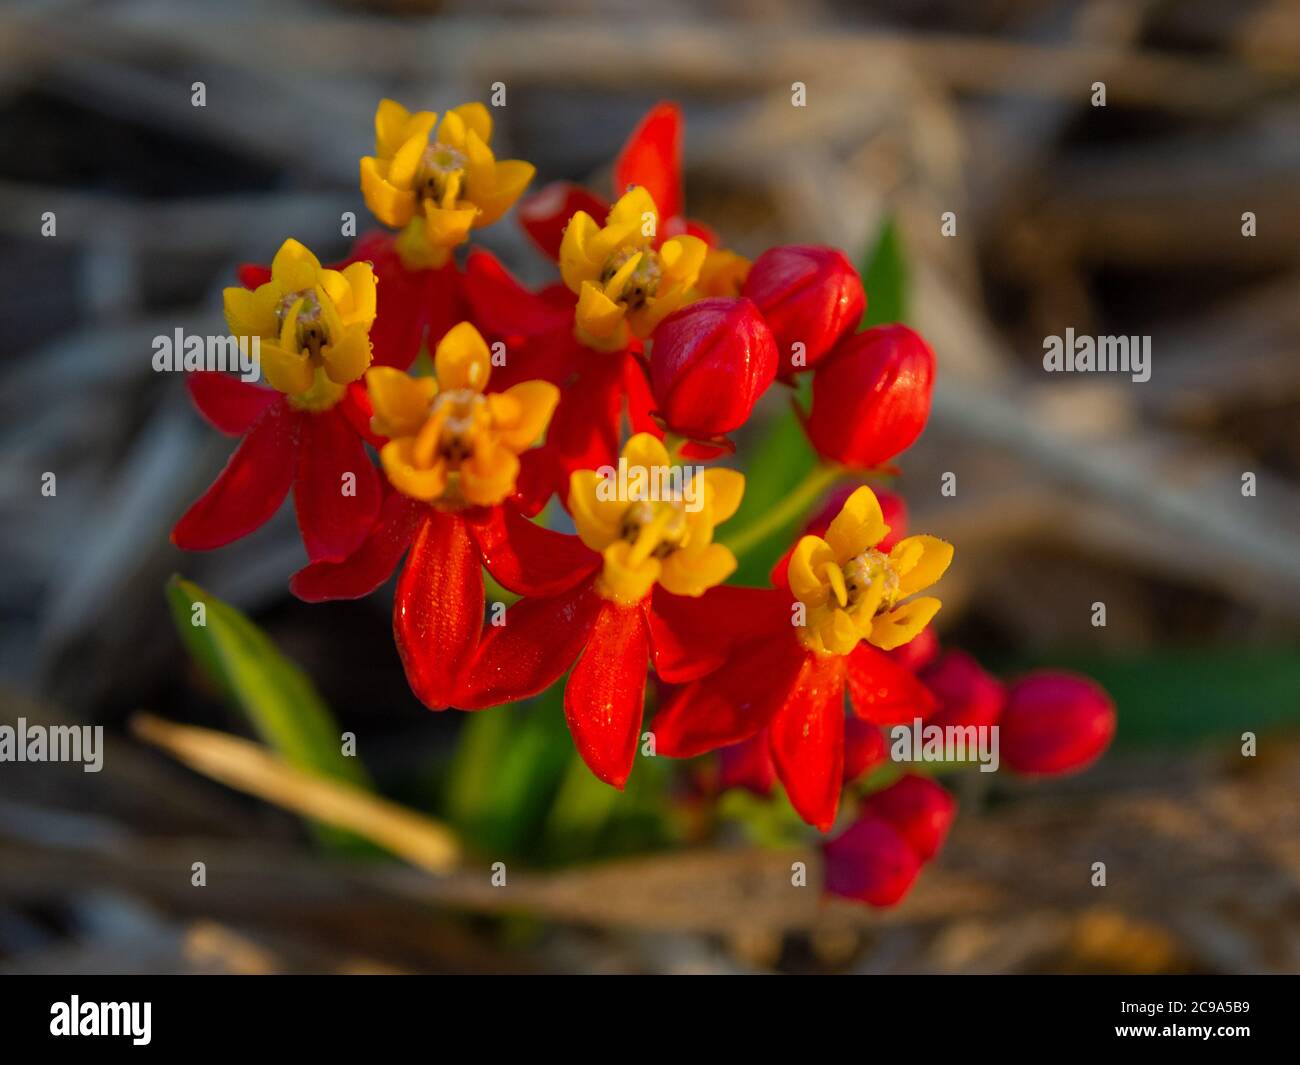 Bloodflower. Closeup beautiful and exotic flowers with yellow and red petals of Asclepias Curassavica Stock Photo